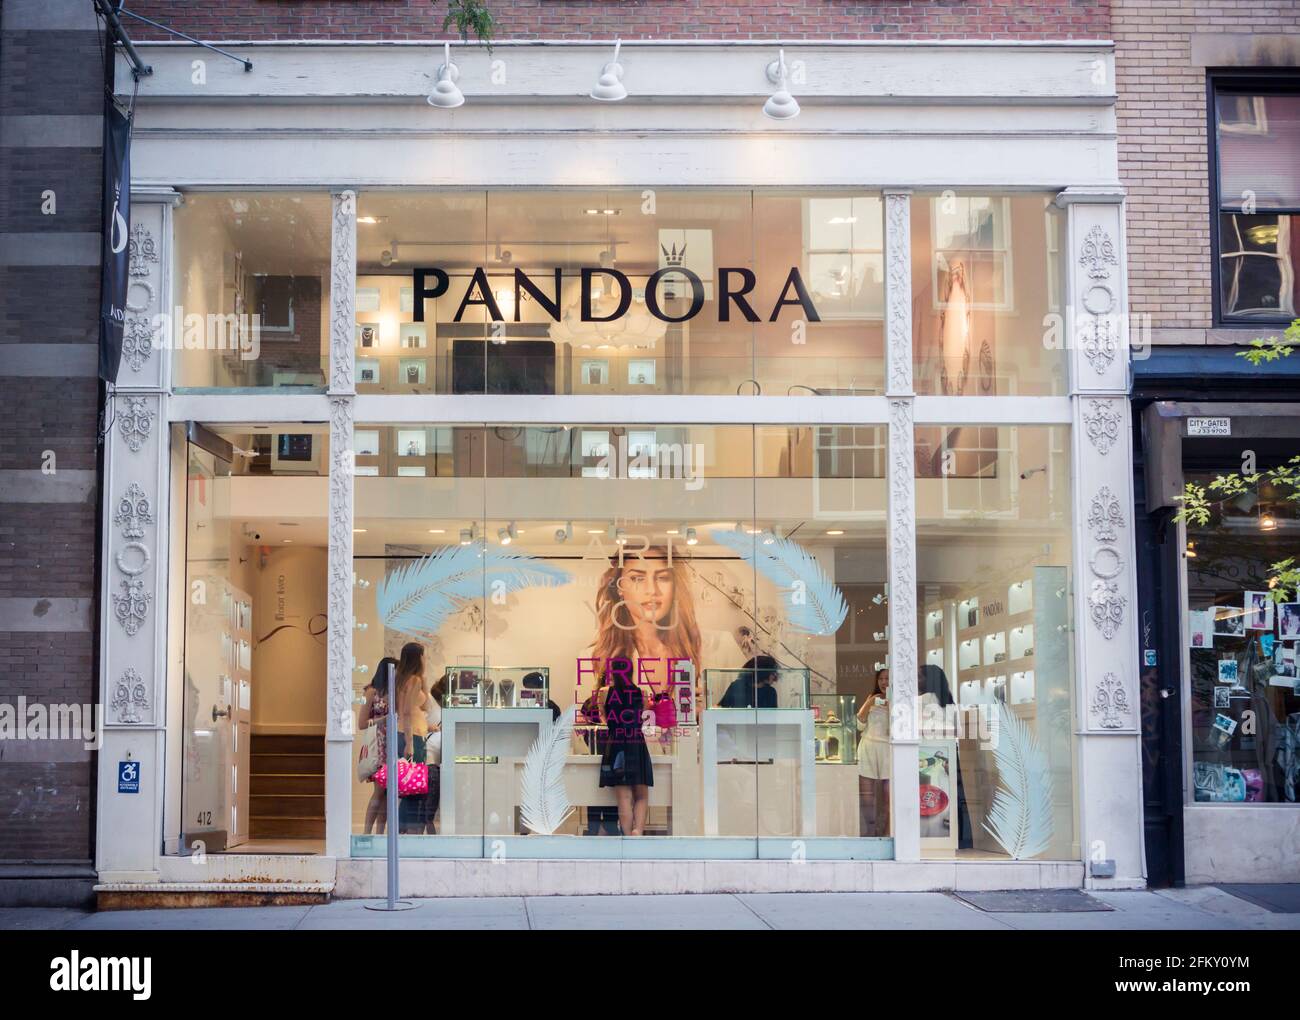 New York, USA. 11th June, 2015. A store of the Pandora chain of jewelry stores in Soho in New York on Thursday, June 11, 2015. Pandora, a Danish company, is mostly associated with their charm bracelets. (Photo by Richard B. Levine) Credit: Sipa USA/Alamy Live News Stock Photo